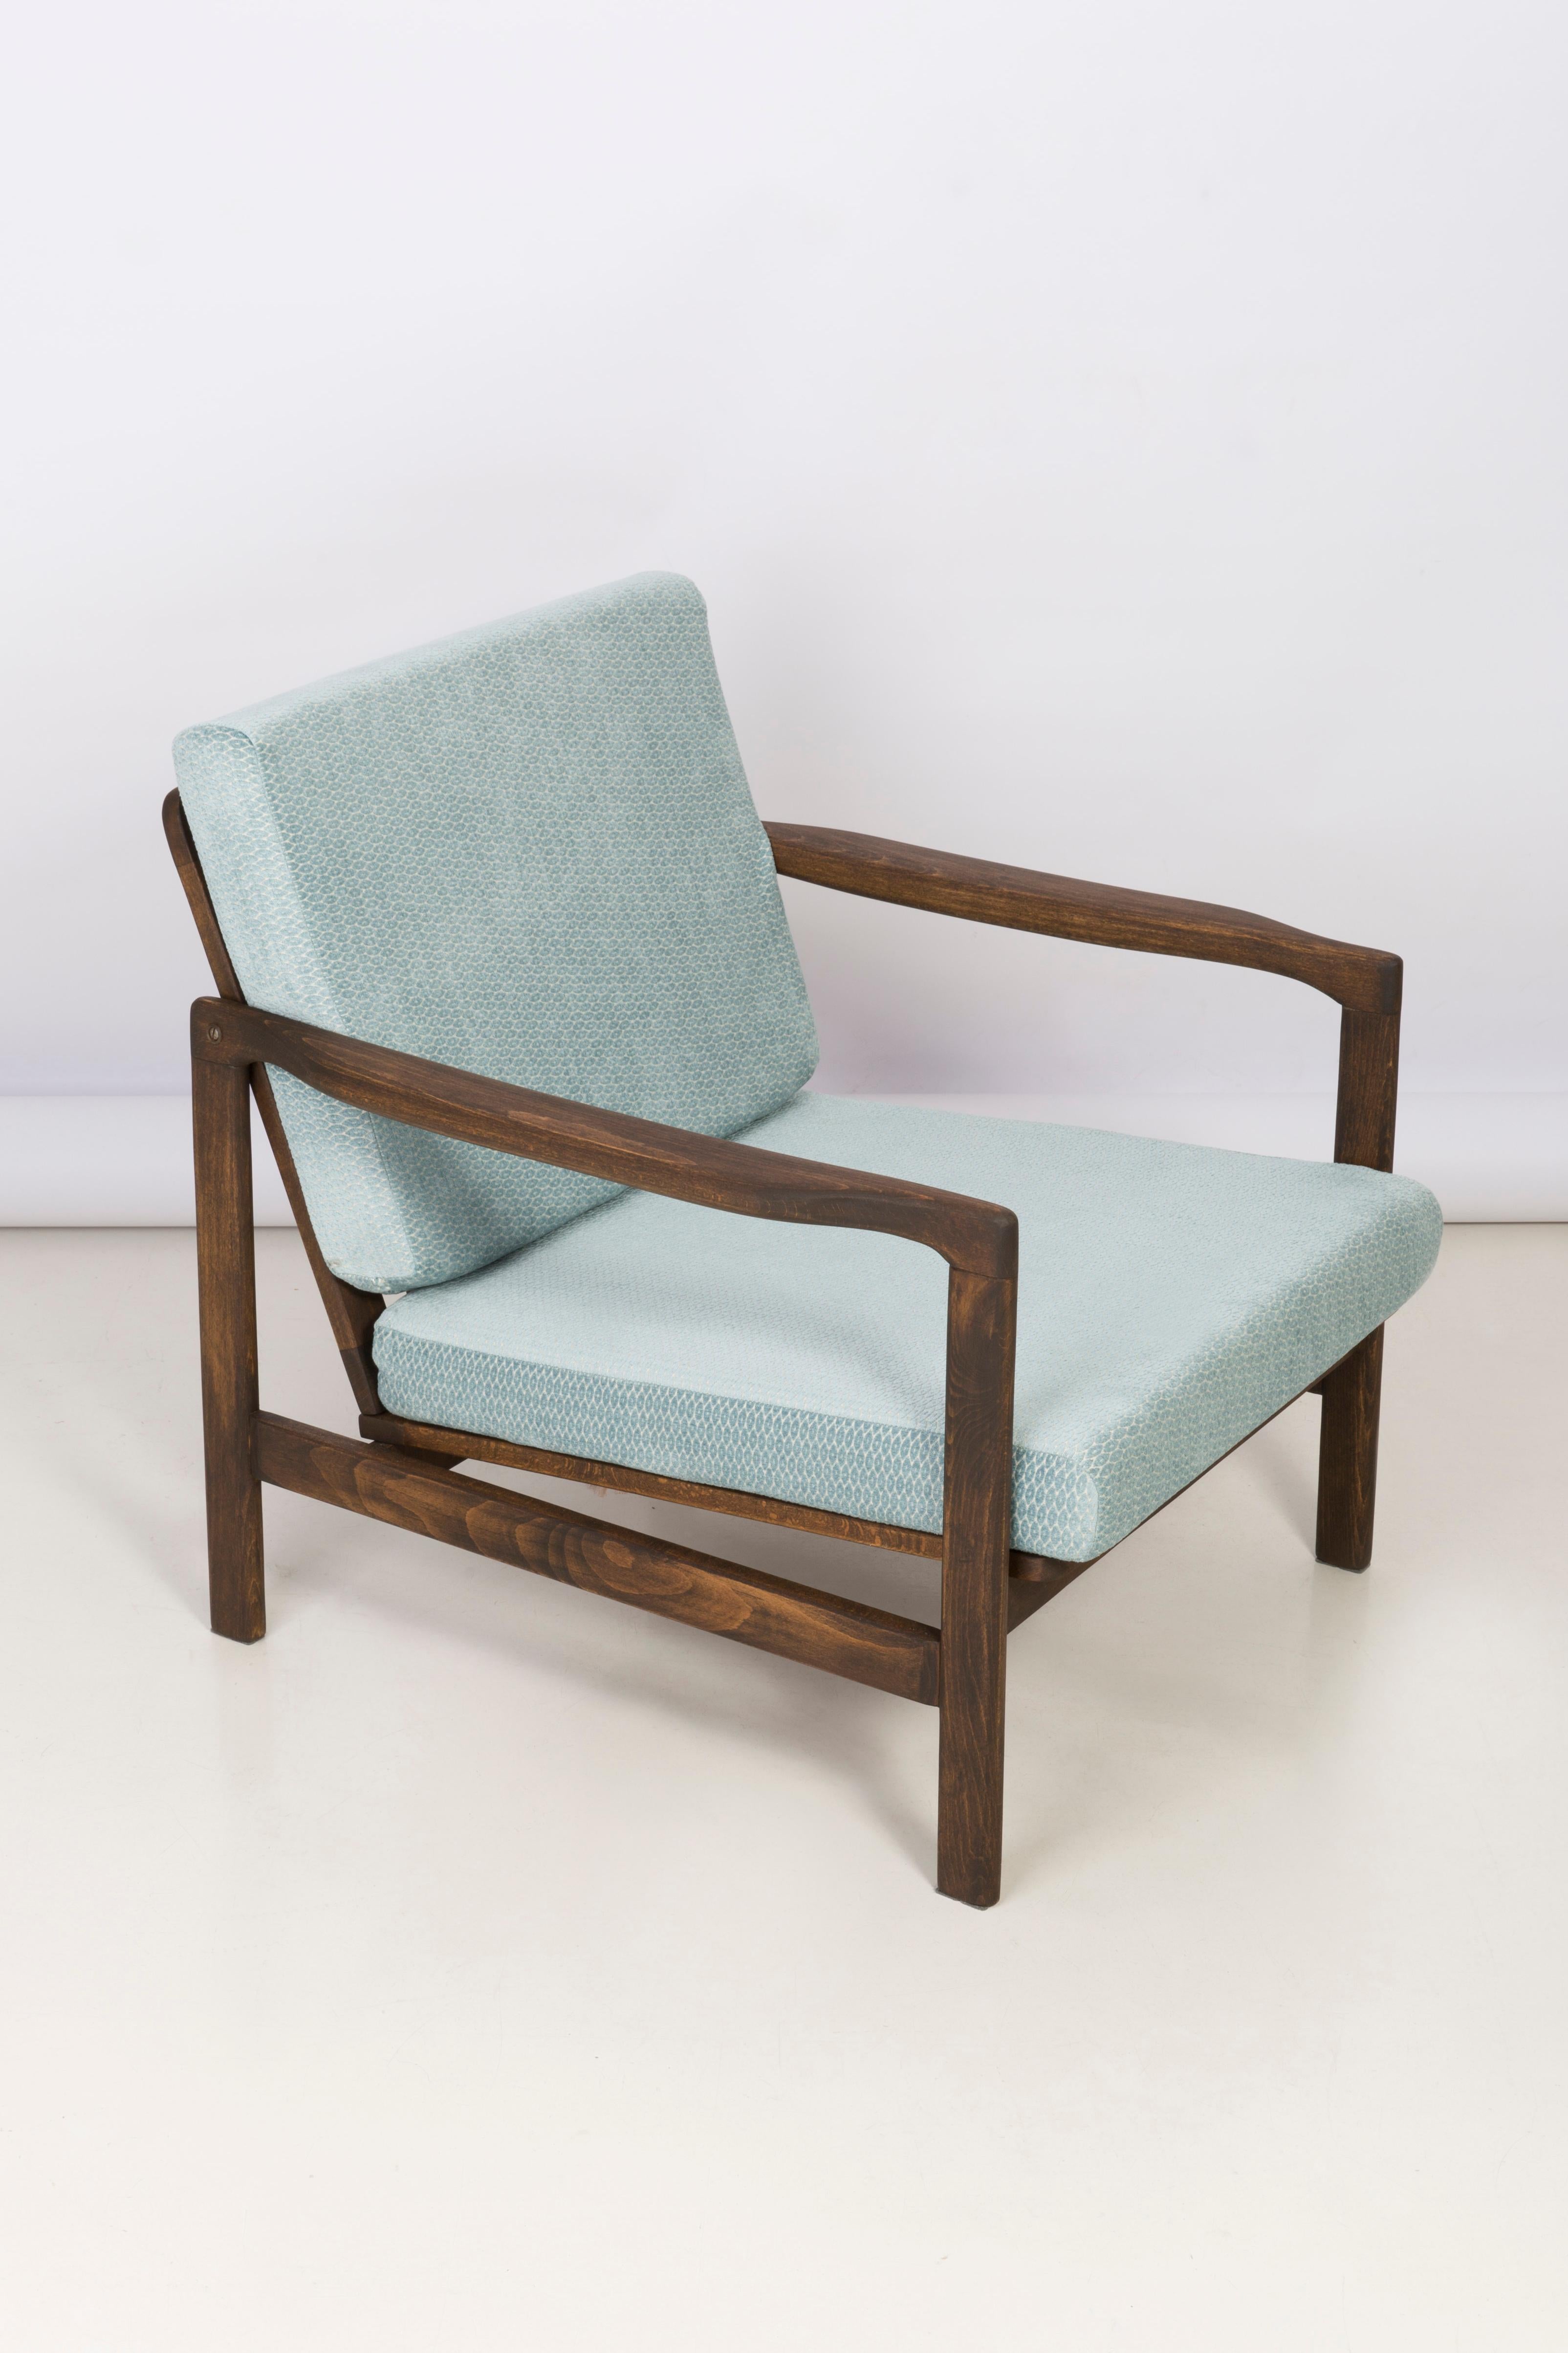 Set of Two Midcentury Baby Blue Pattern Velvet Armchairs, Zenon Baczyk, 1960s For Sale 1